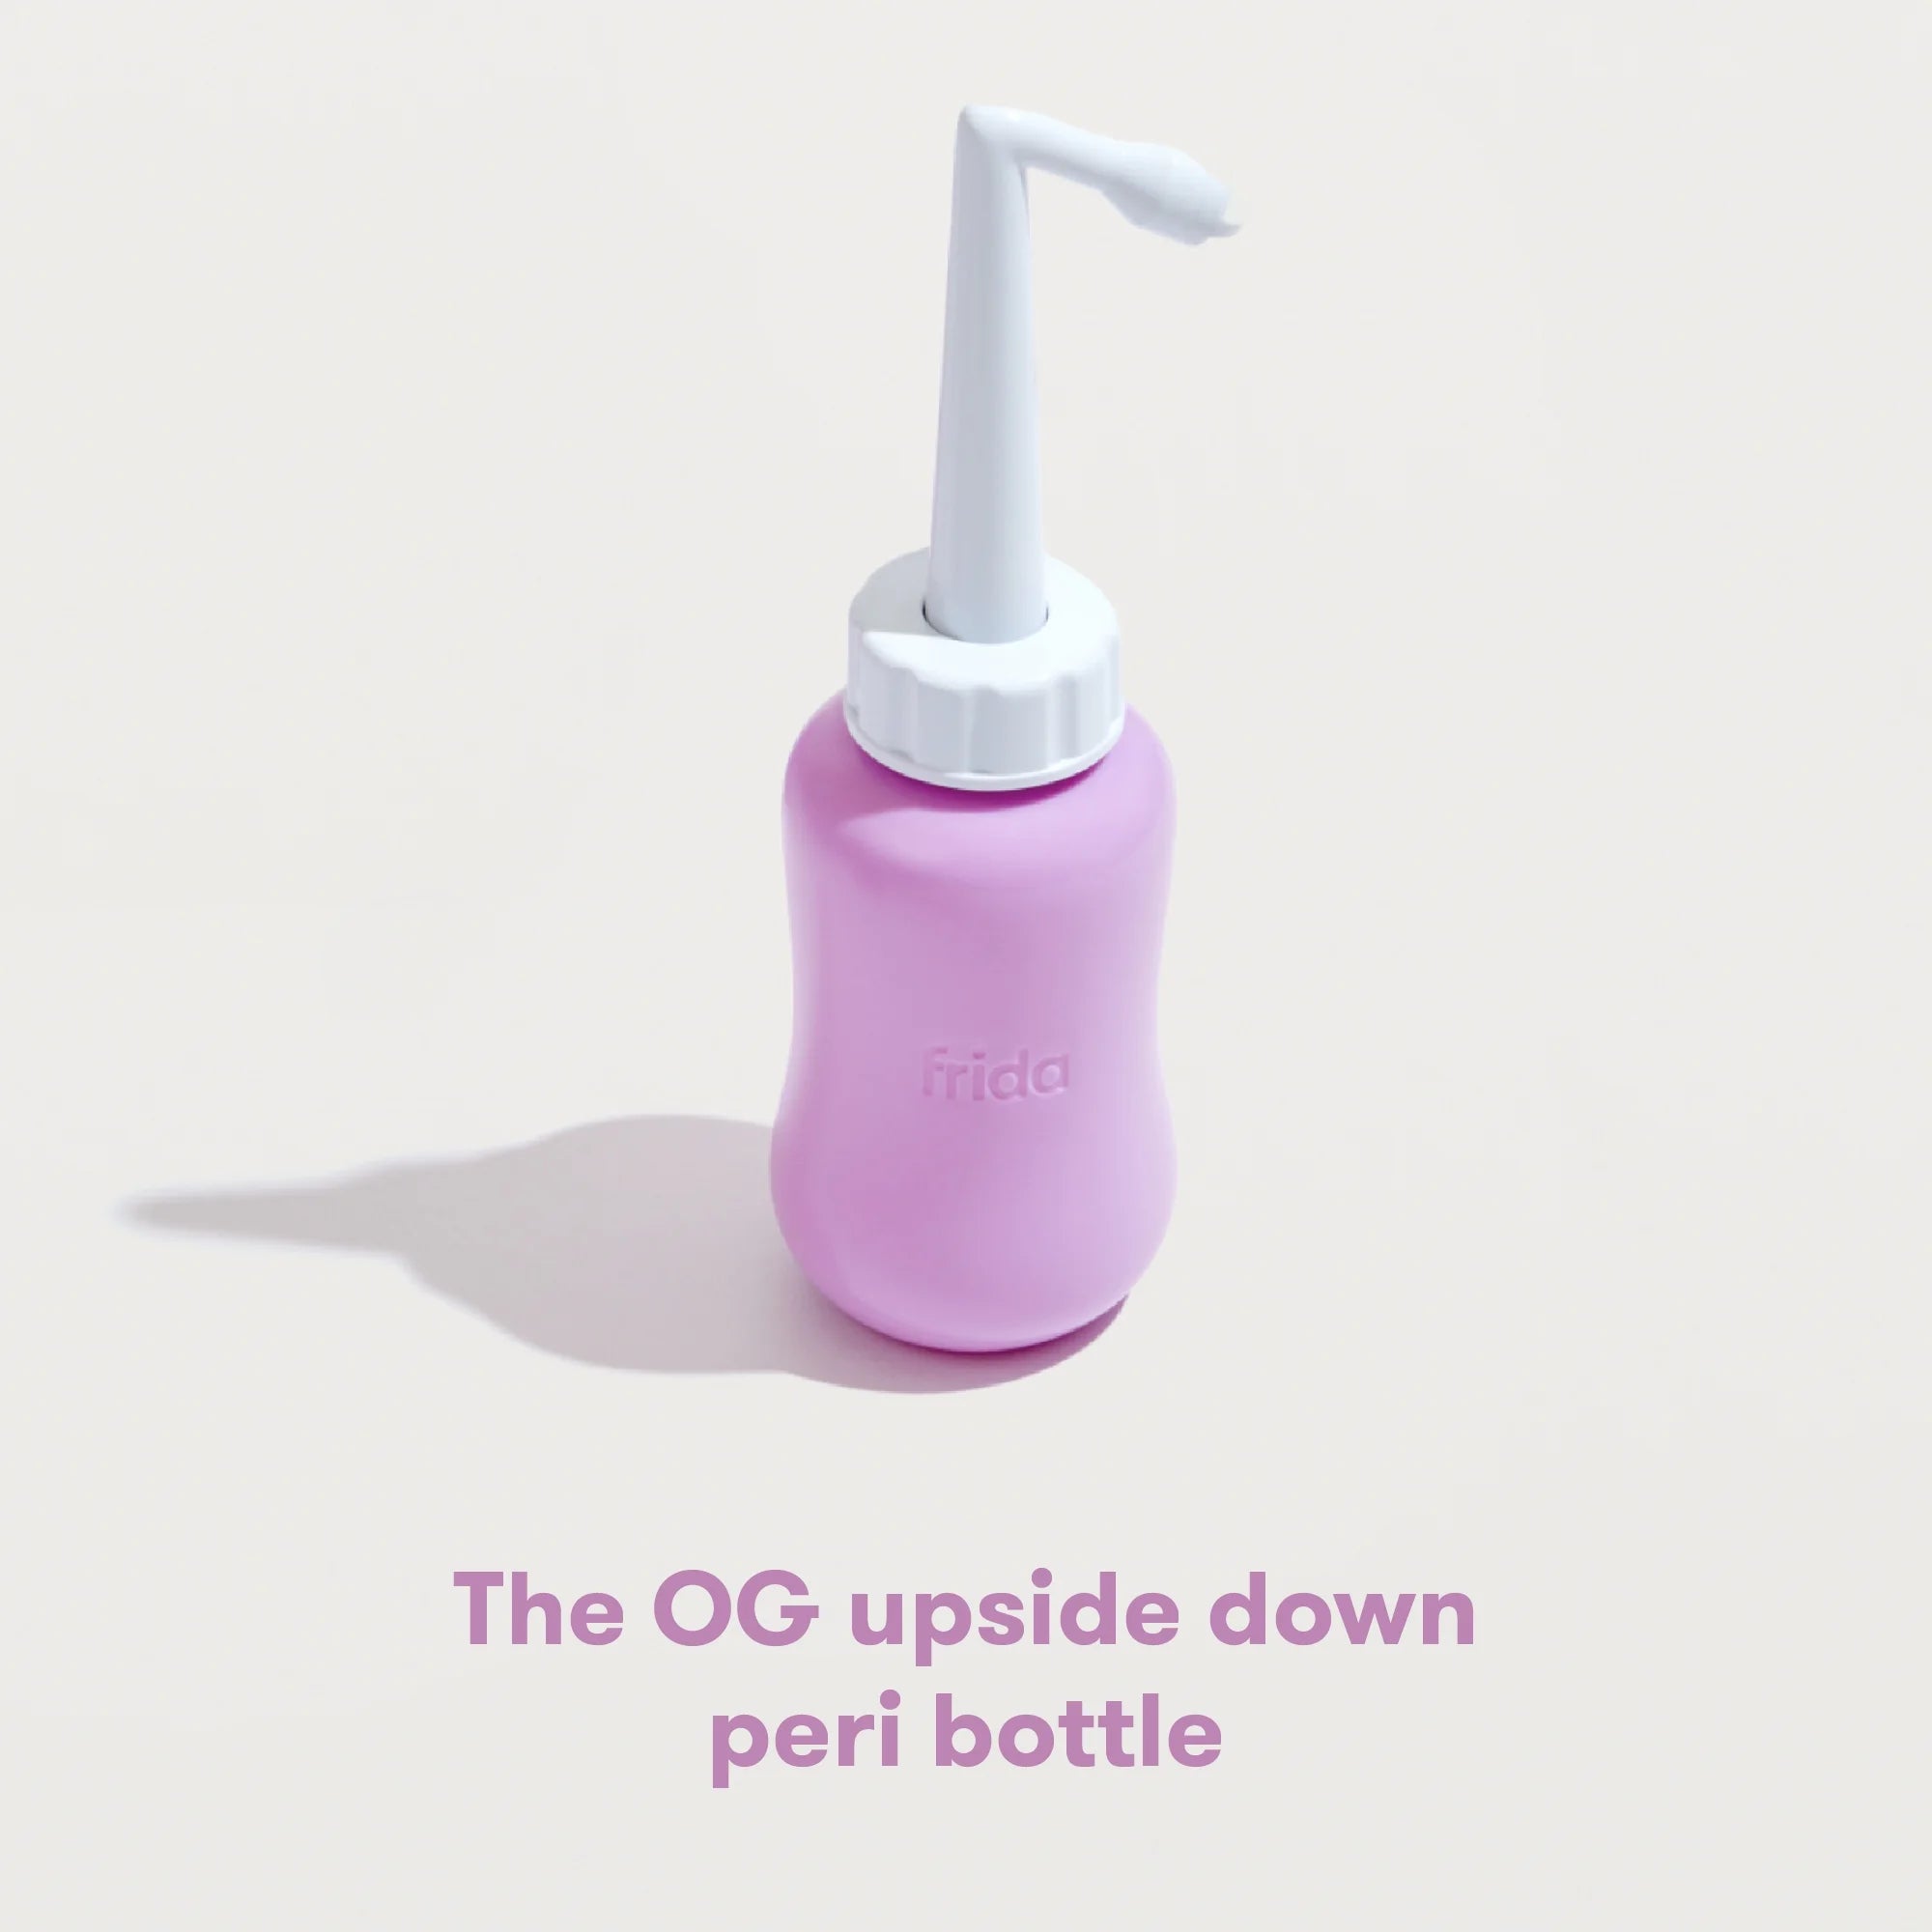 Upside down Peri Bottle for Cleansing after Birth, + Travel Bag, 1 Ct